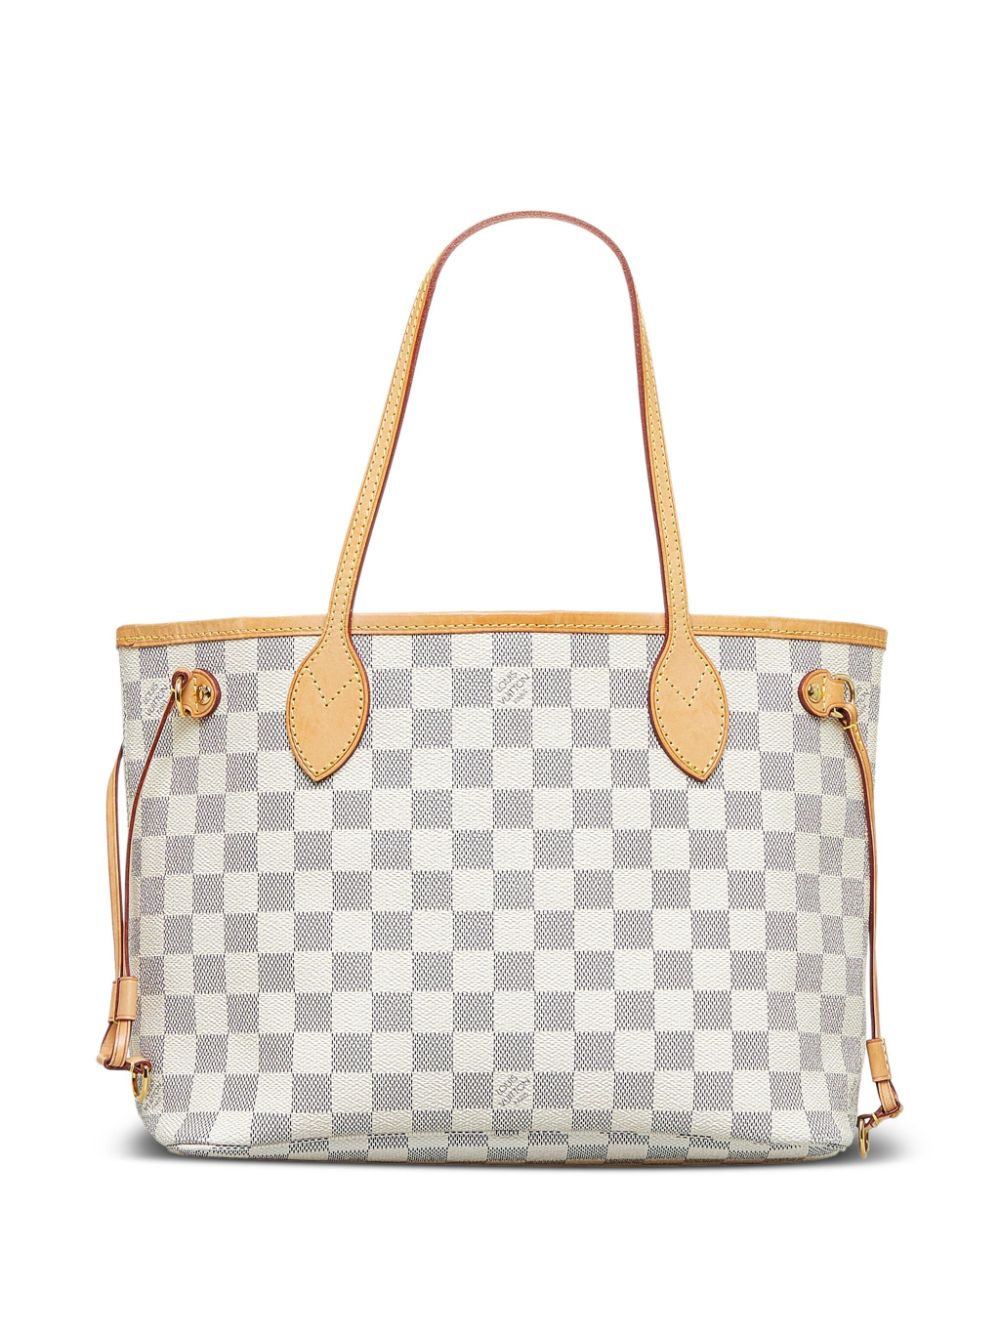 Louis Vuitton 2010 pre-owned Neverfull PM tote bag - Wit